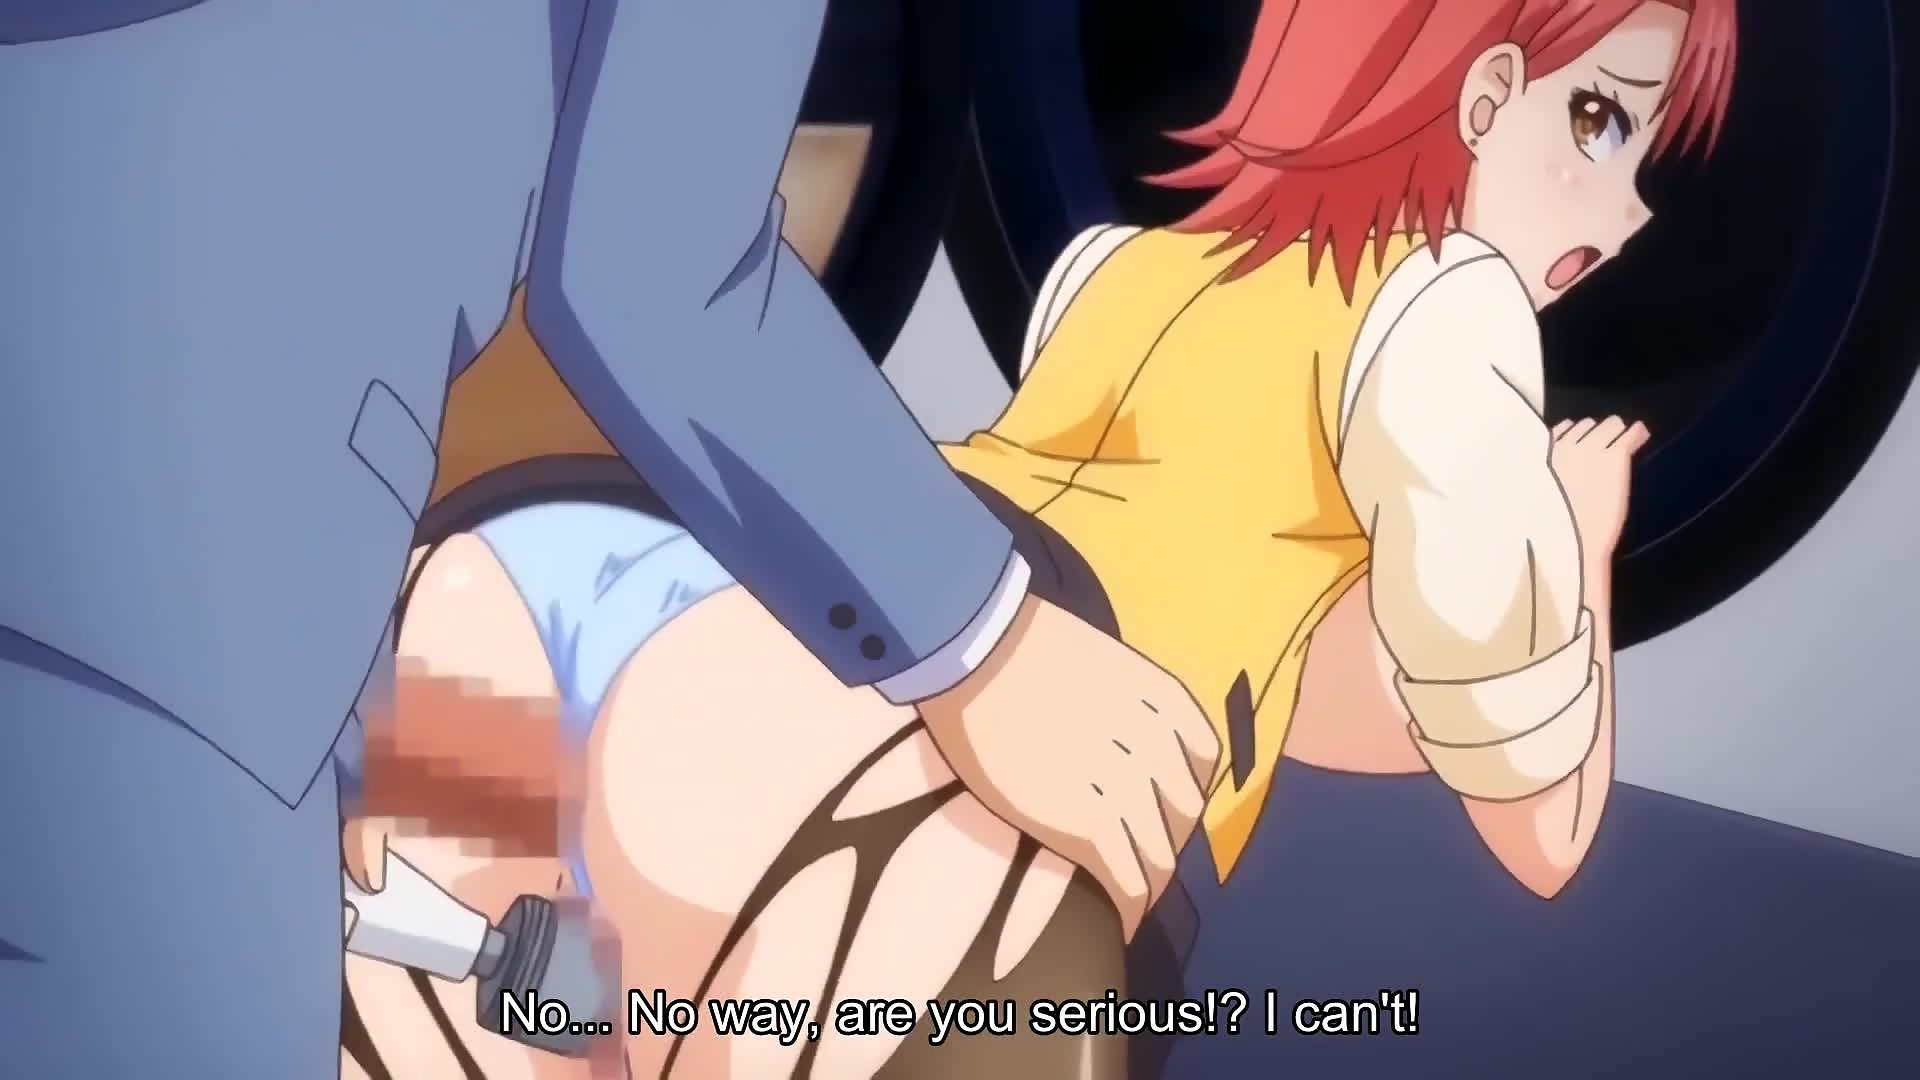 Punishment 2 ep2 - Busty hentai lesbian gets her virgin asshole fucked pic photo